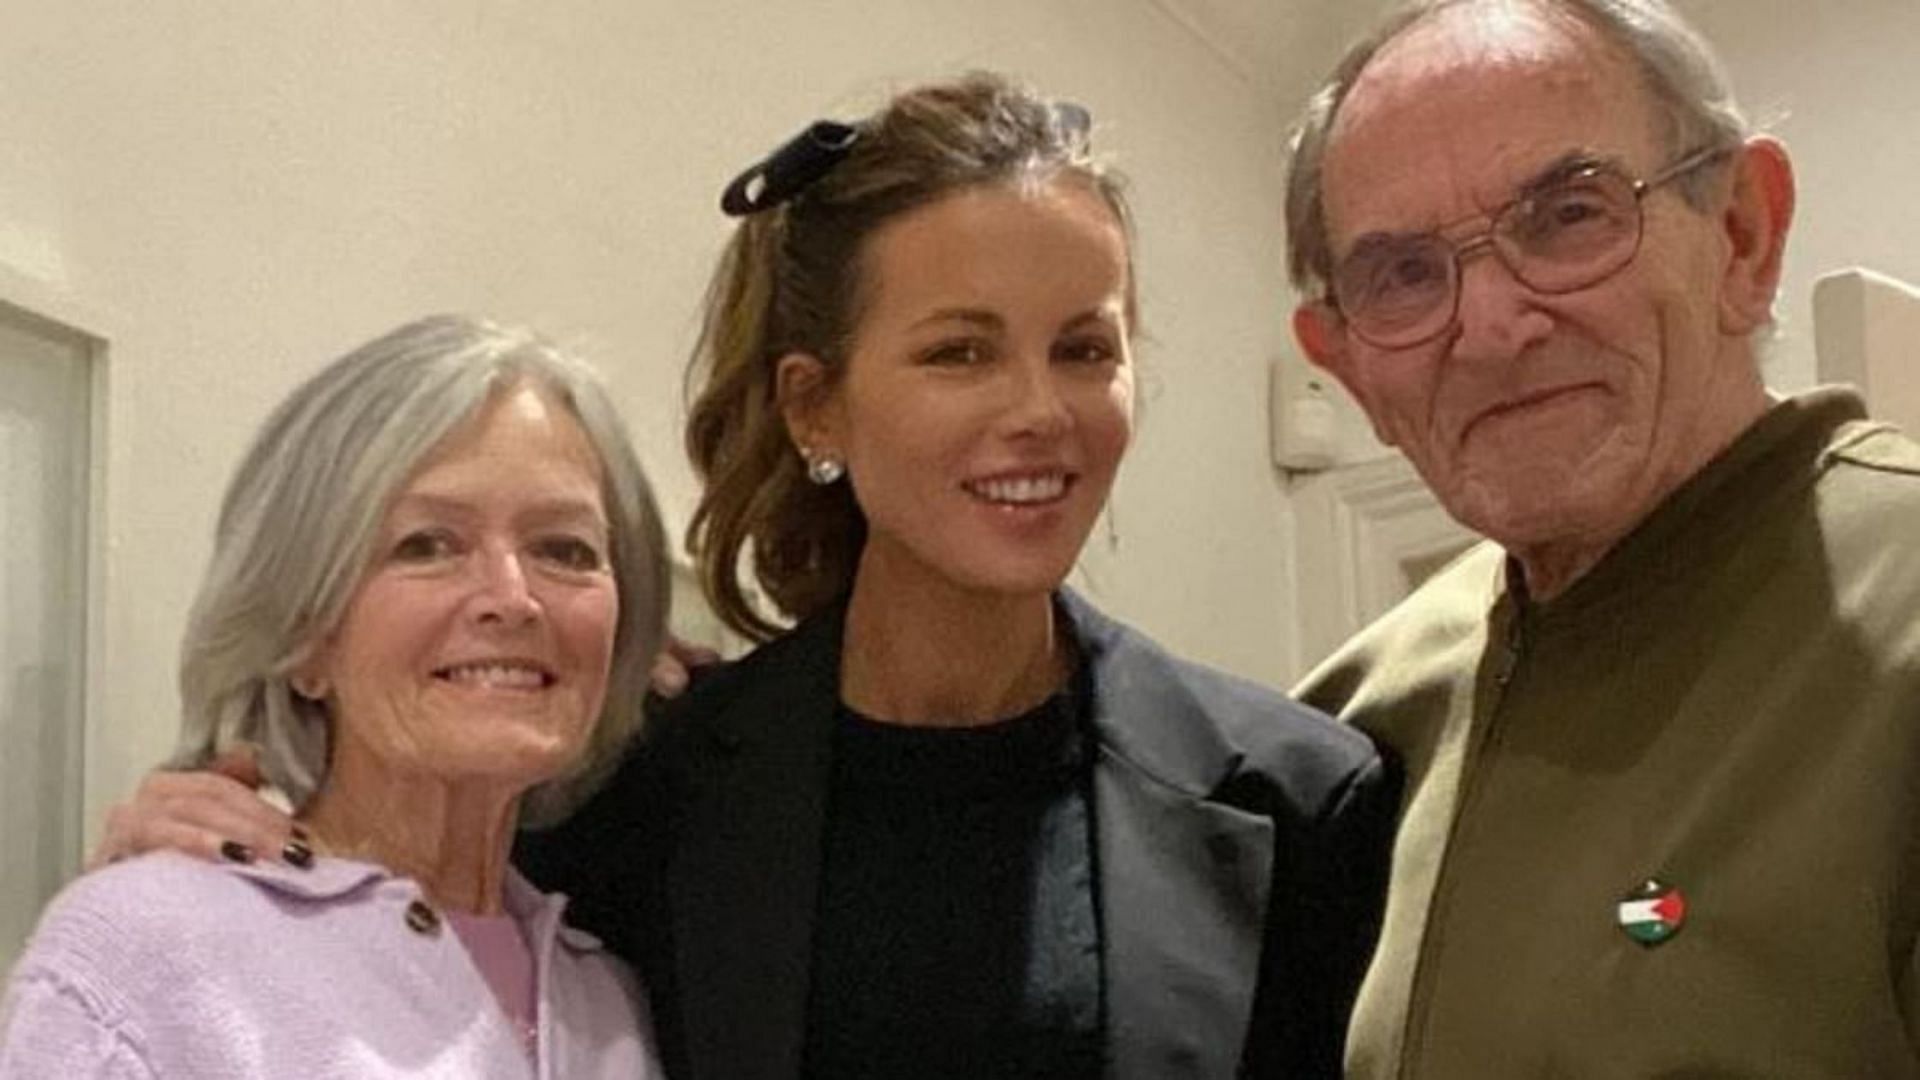 Roy Battersby died at the age of 87, announces Kate Beckinsale his stepdaughter (Image via X/@thealertcontent)